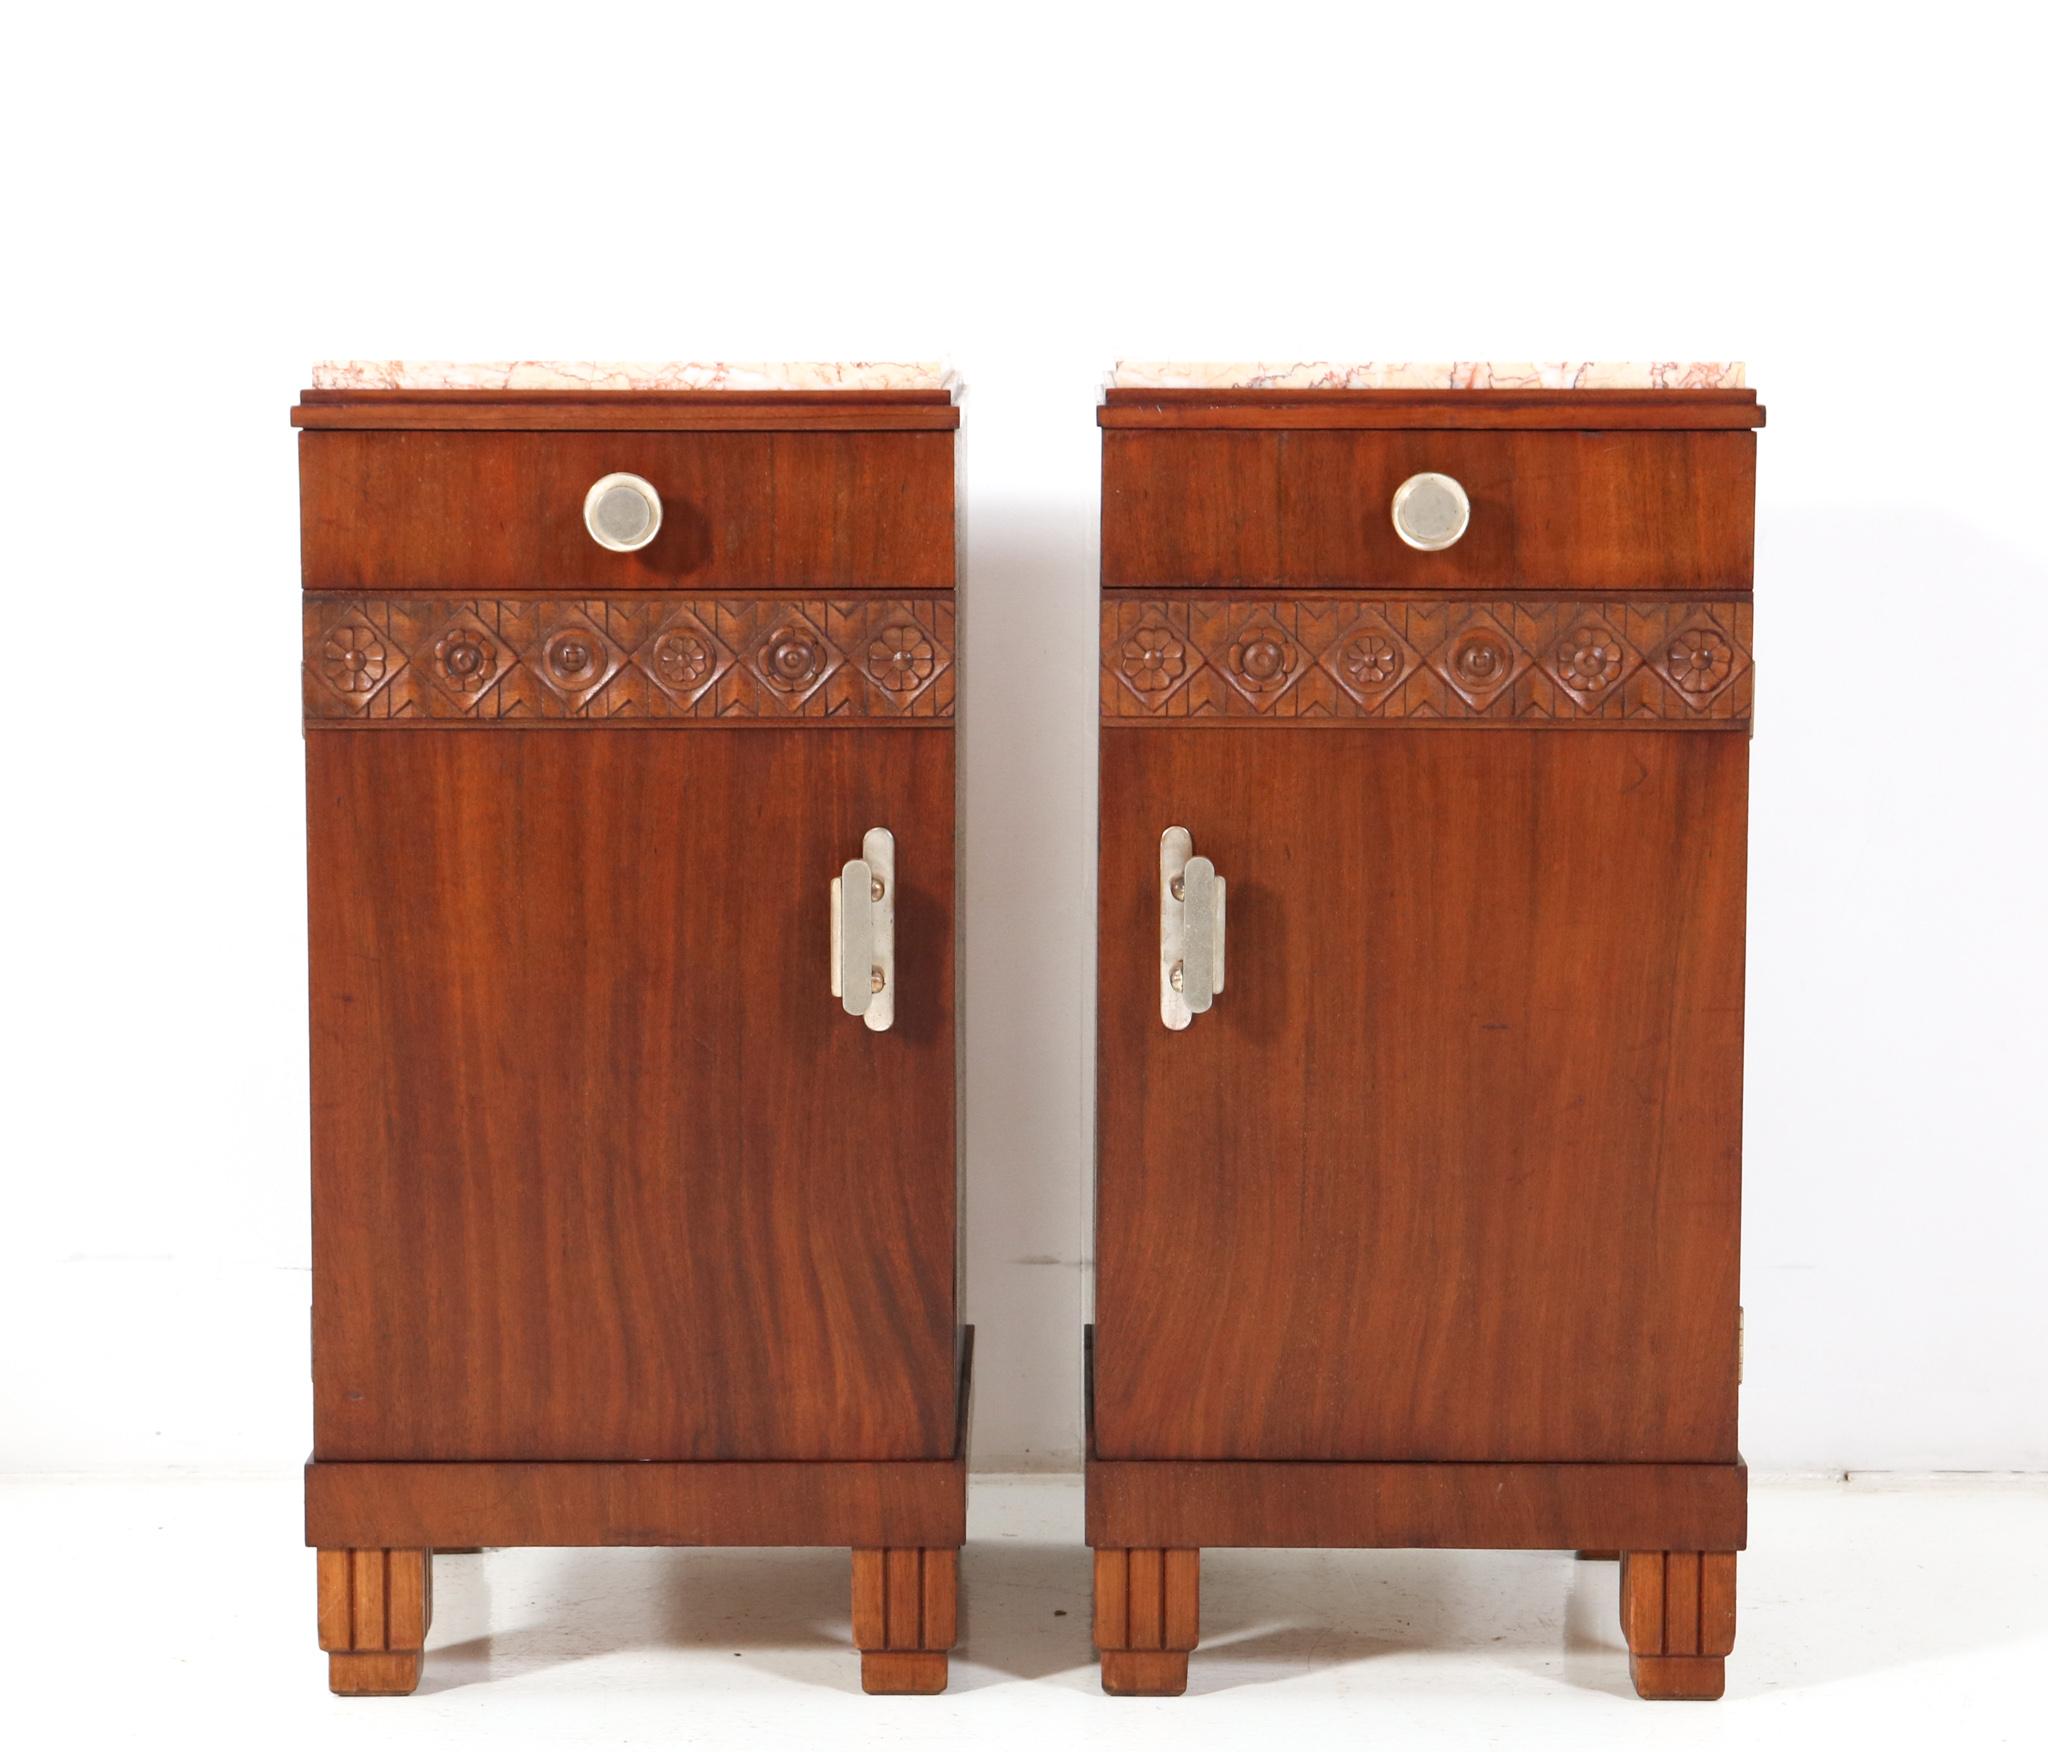 Stunning pair of Art Deco nightstands or bedside tables.
Striking French design from the 1930s.
Solid walnut and original walnut veneer base.
The doors and drawers have the original handles and knobs.
Original multi-colored marble tops.
This